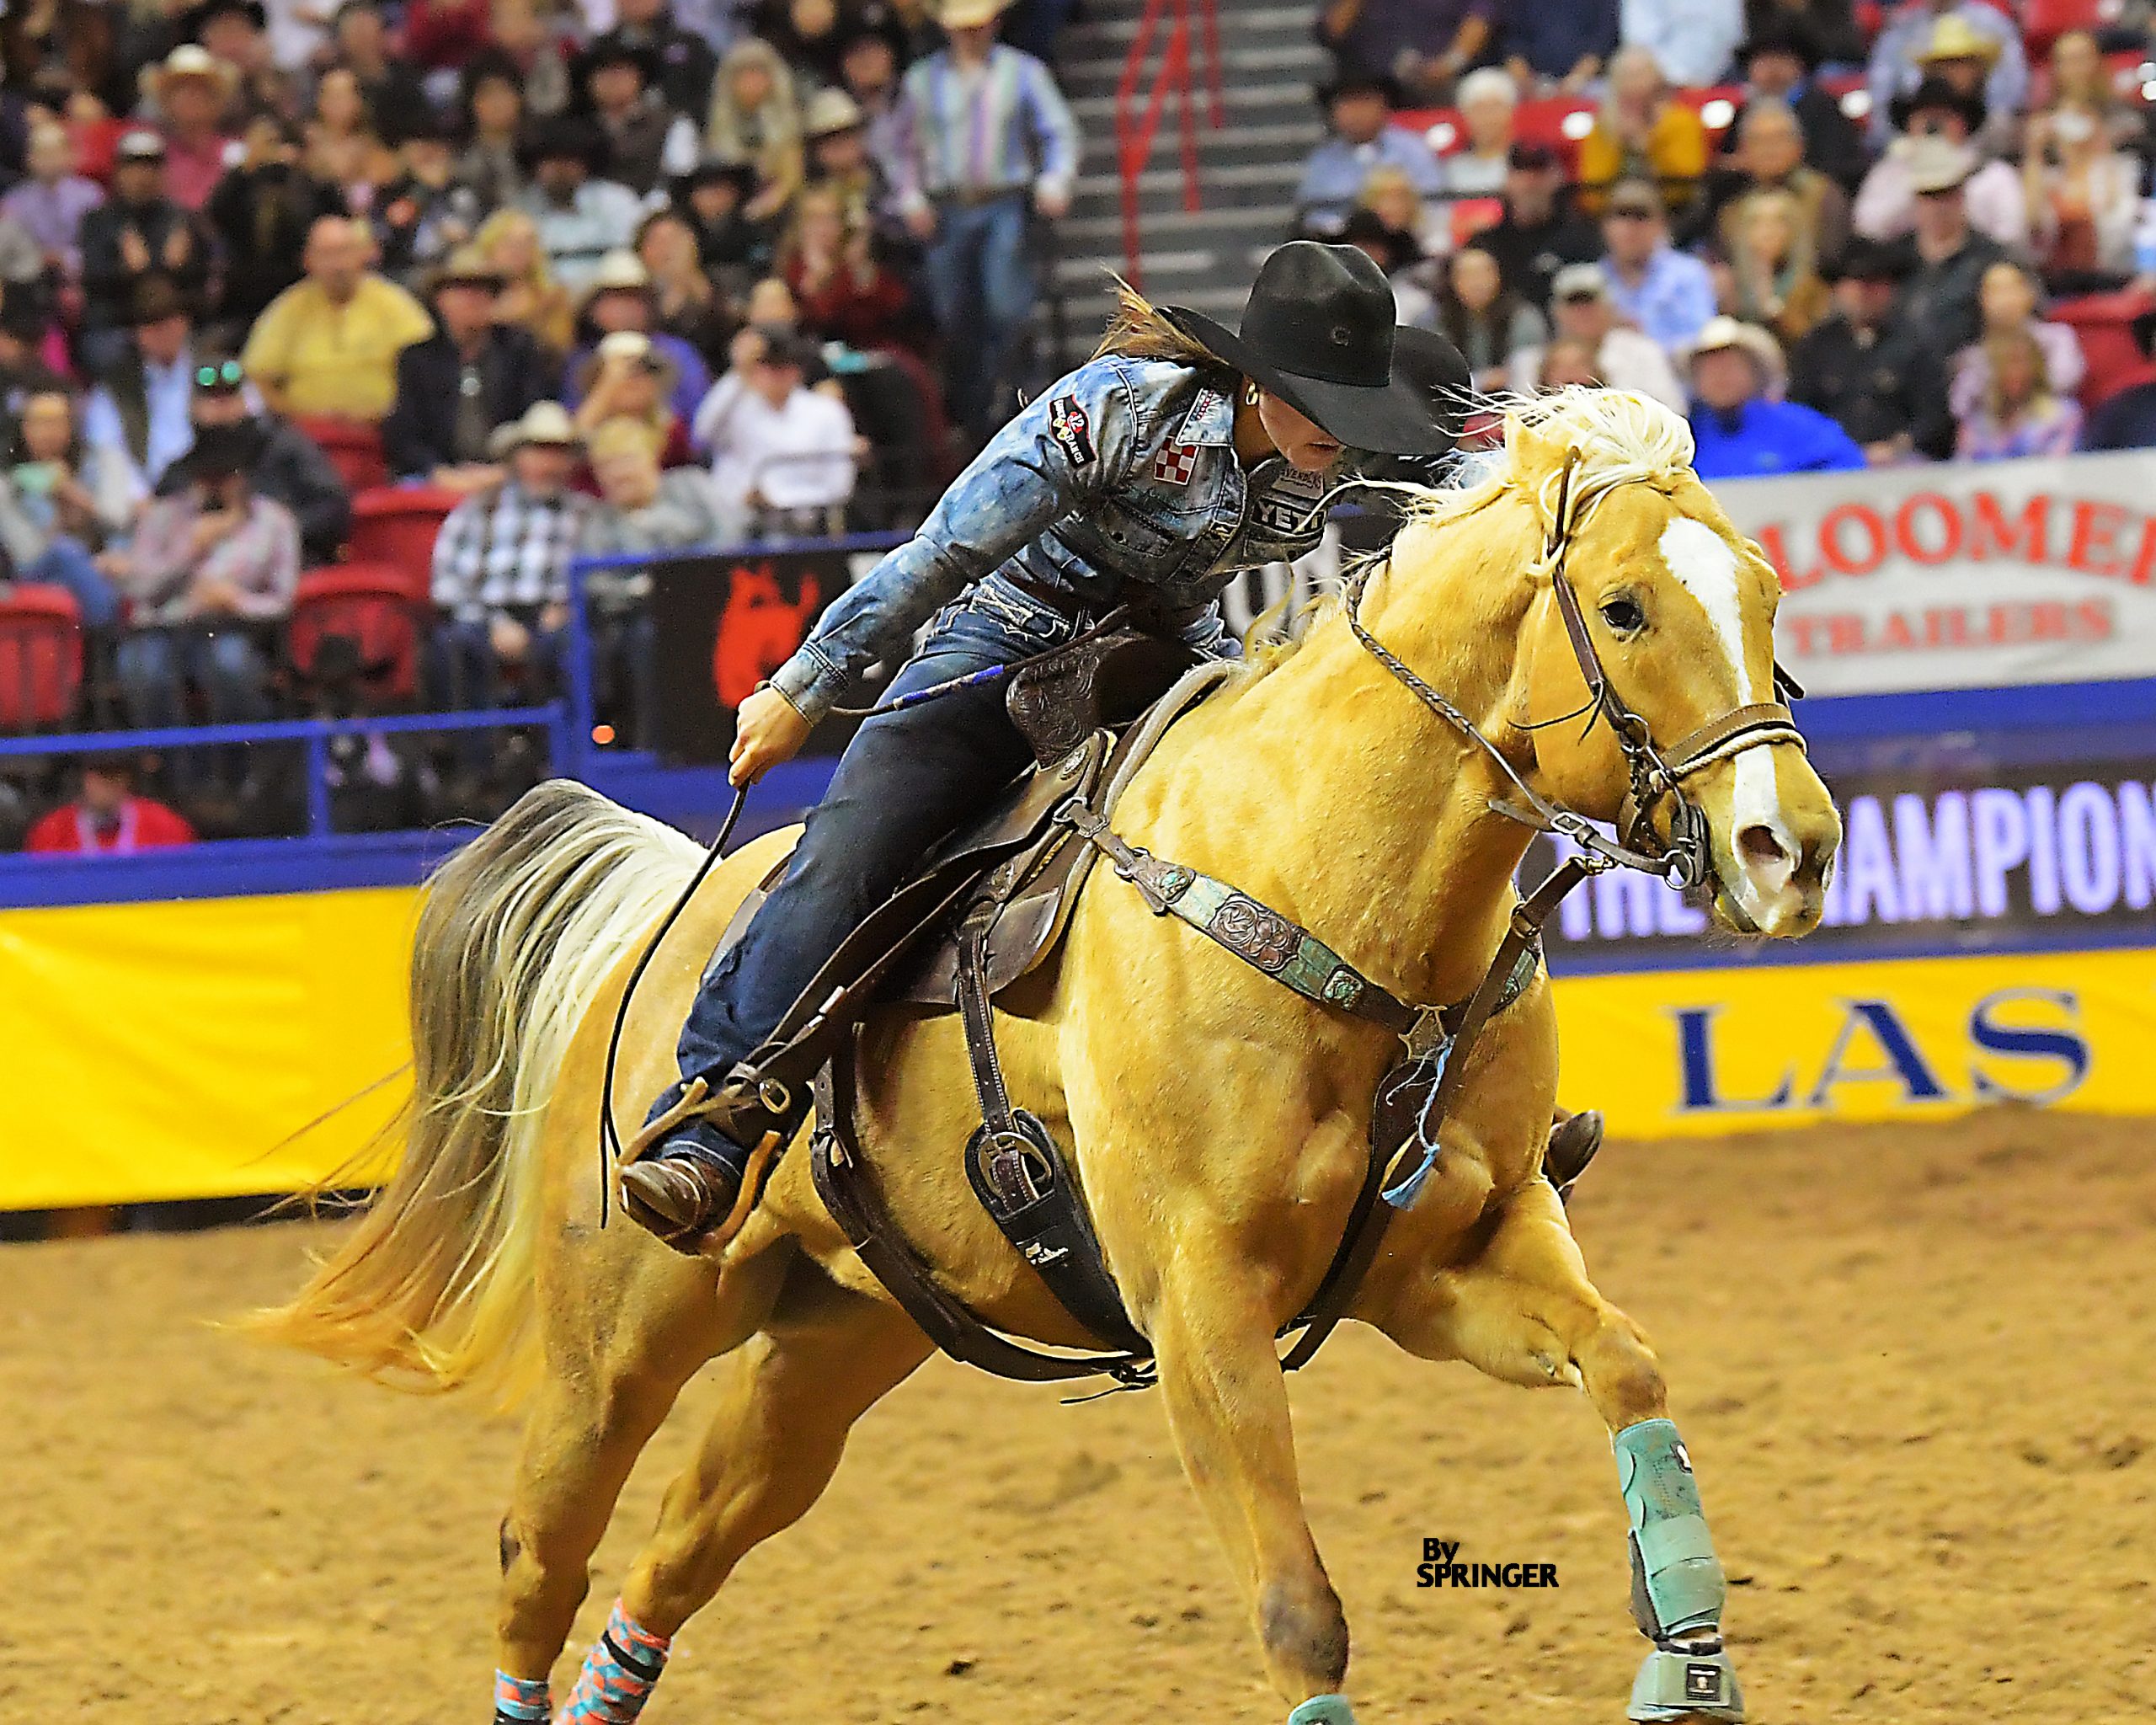 Kinsel Clutch in Round Seven of Wrangler NFR Barrel Horse News